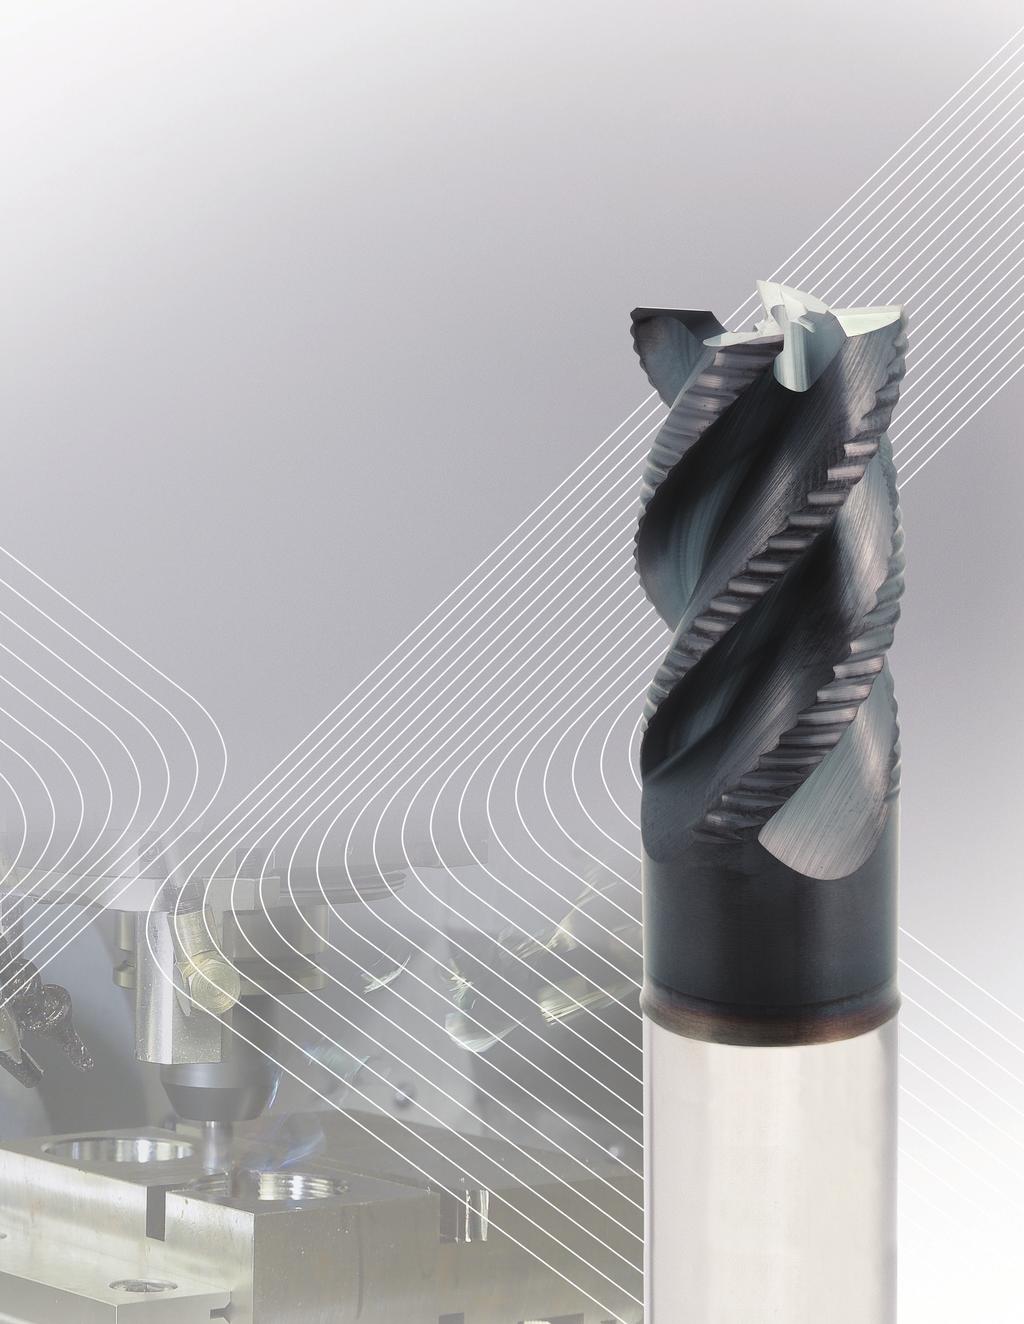 Multi-Cut igh Performance End Mills for universal milling plications. TM Multi-Cut End Mills can achieve metal removal rates to times that of conventional end mills in a full range of materials.